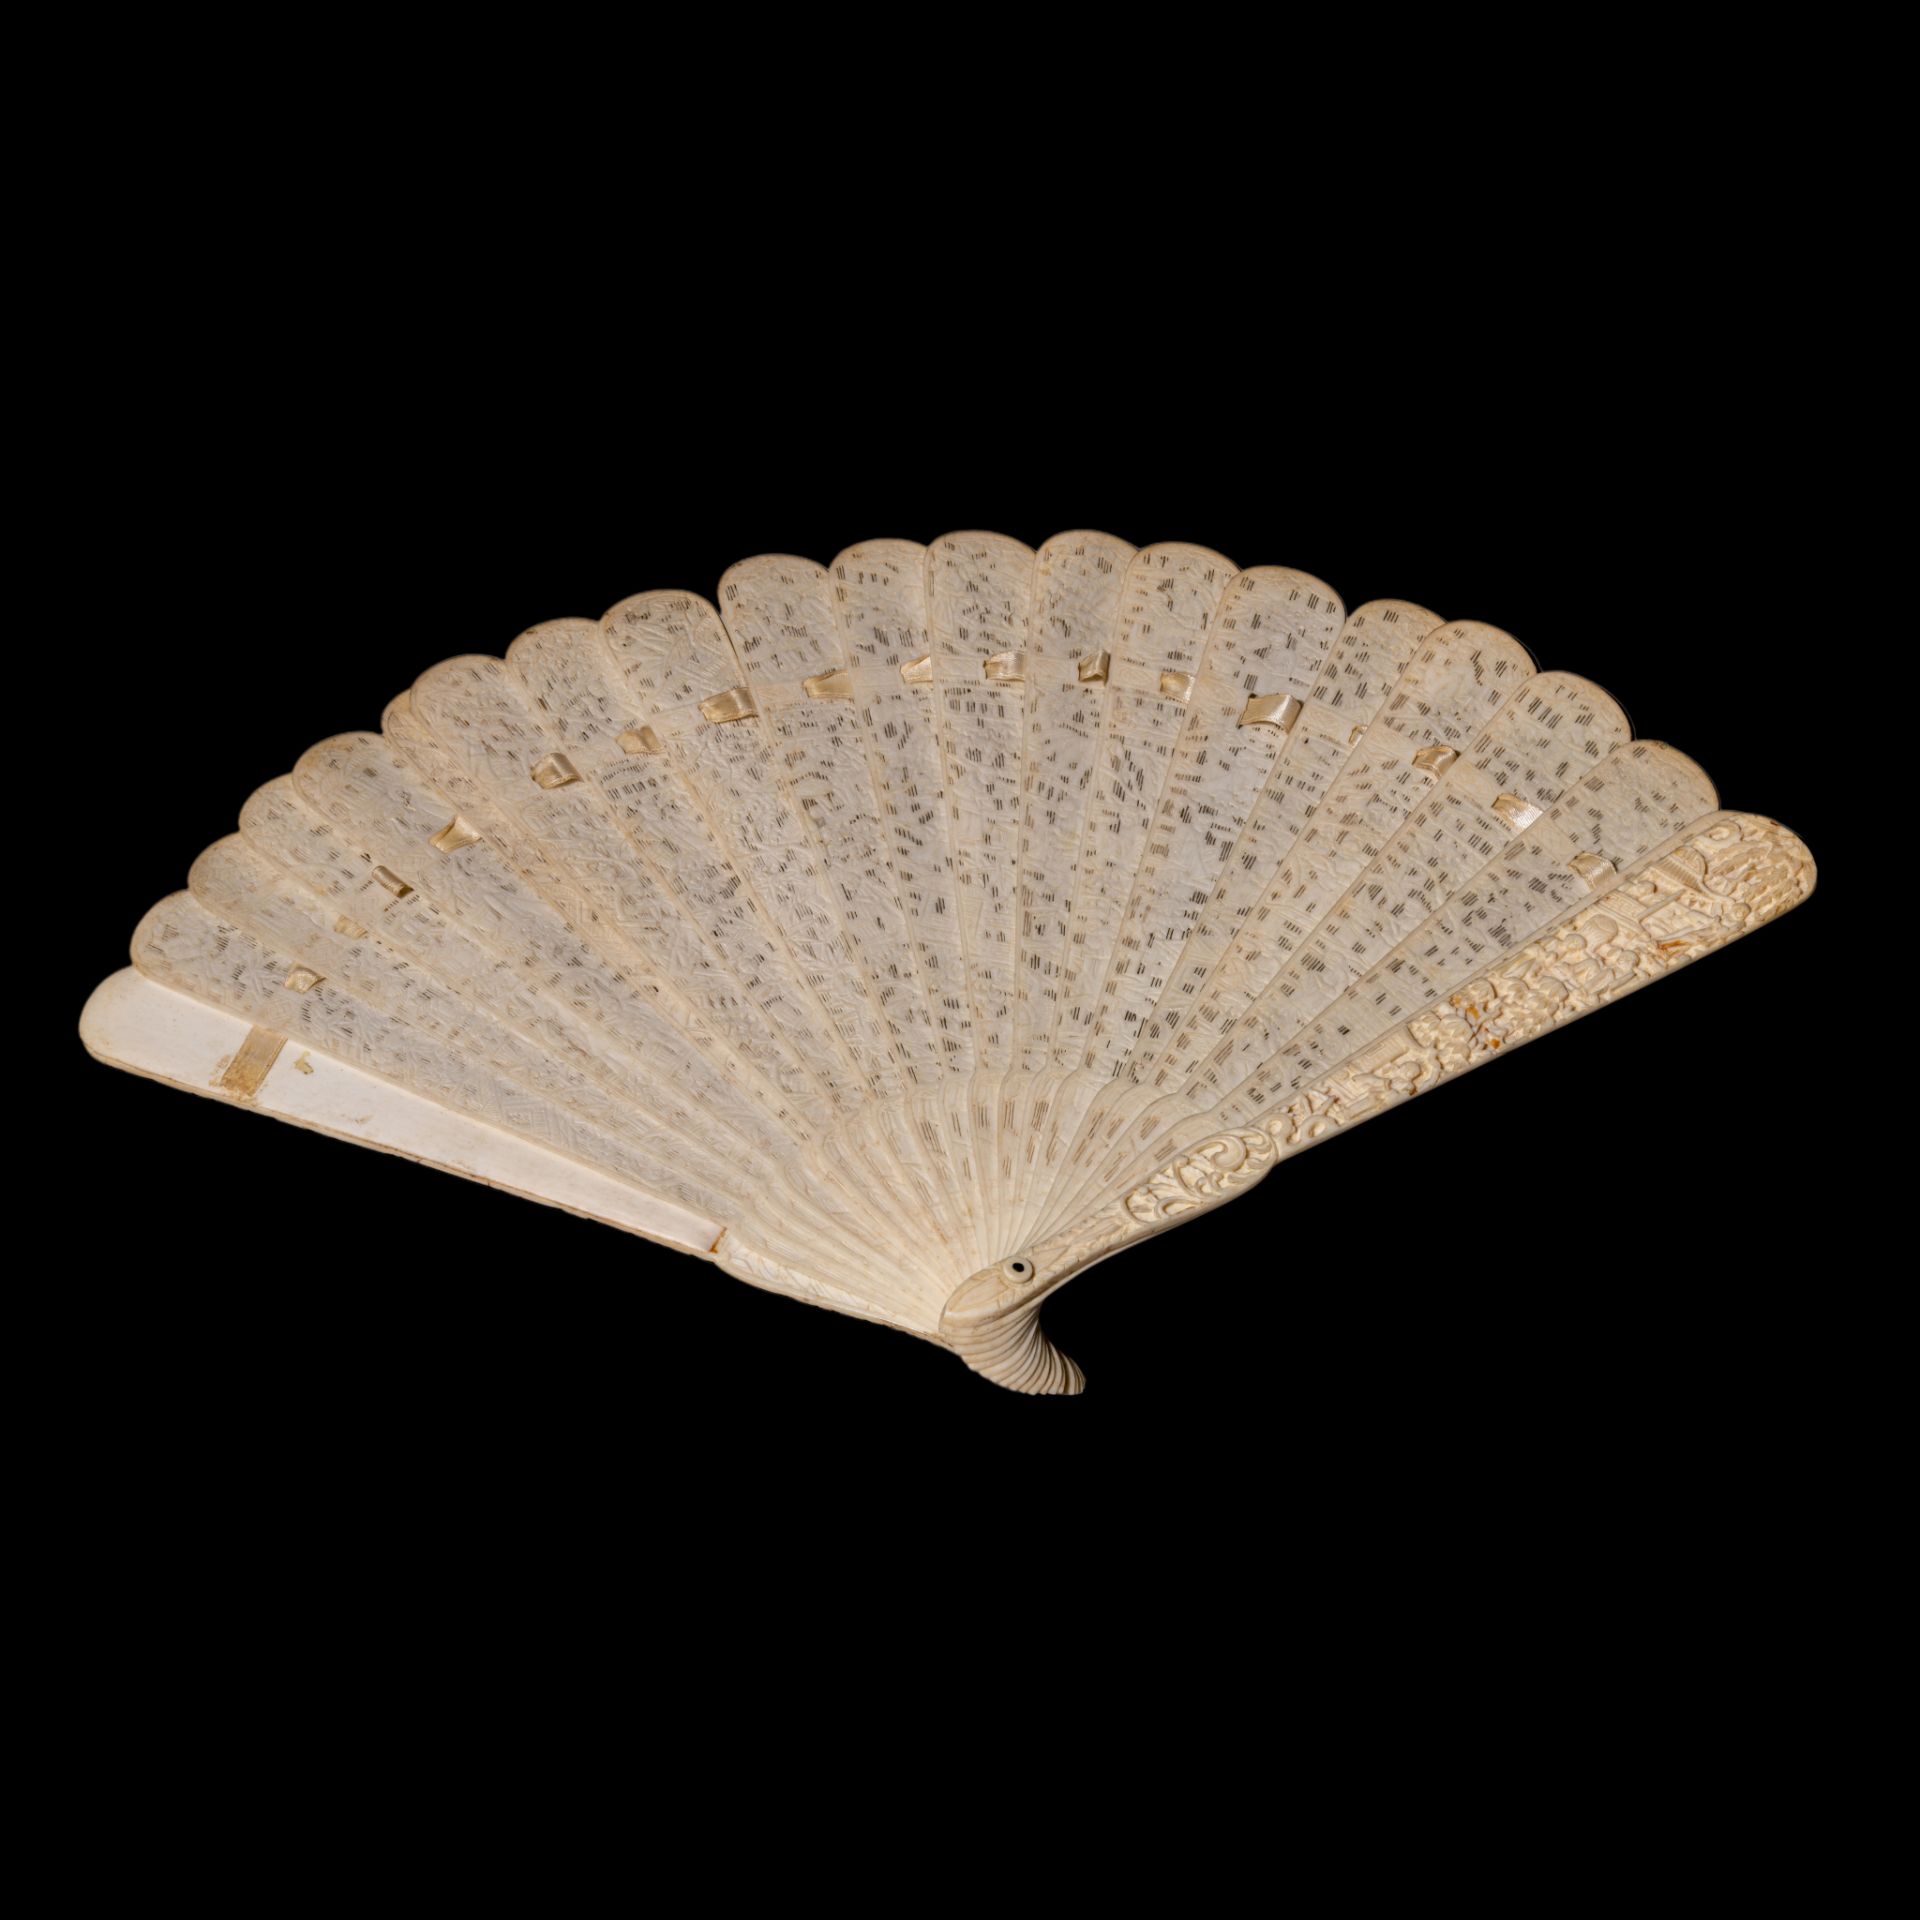 Three Chinese late Qing / early Republic ivory fans, H 16,4 - 19,4 - 20,3 cm / 39 - 77 - 54 g. - W f - Bild 3 aus 12